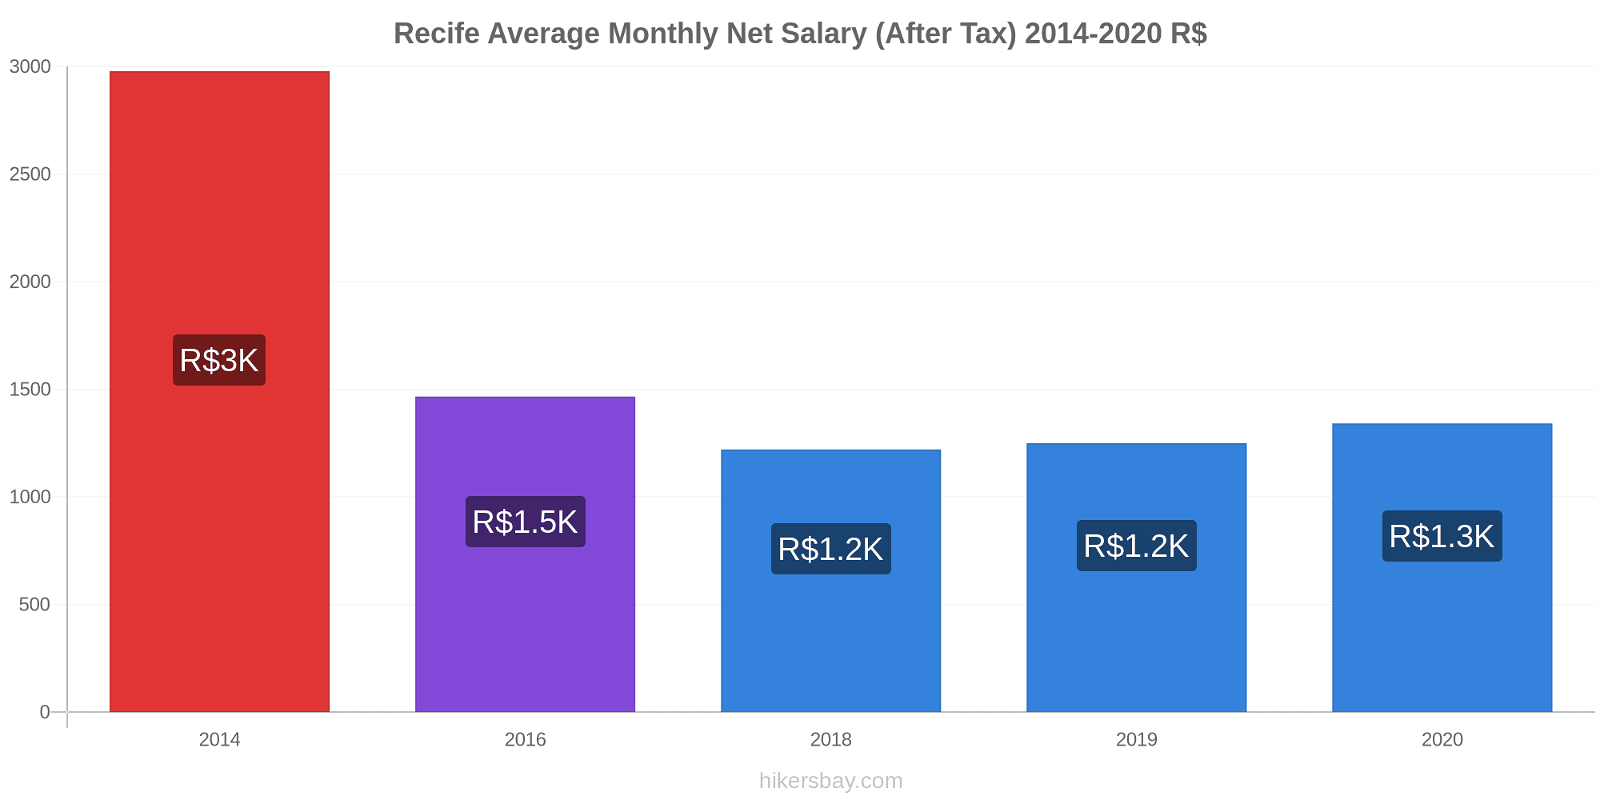 Recife price changes Average Monthly Net Salary (After Tax) hikersbay.com